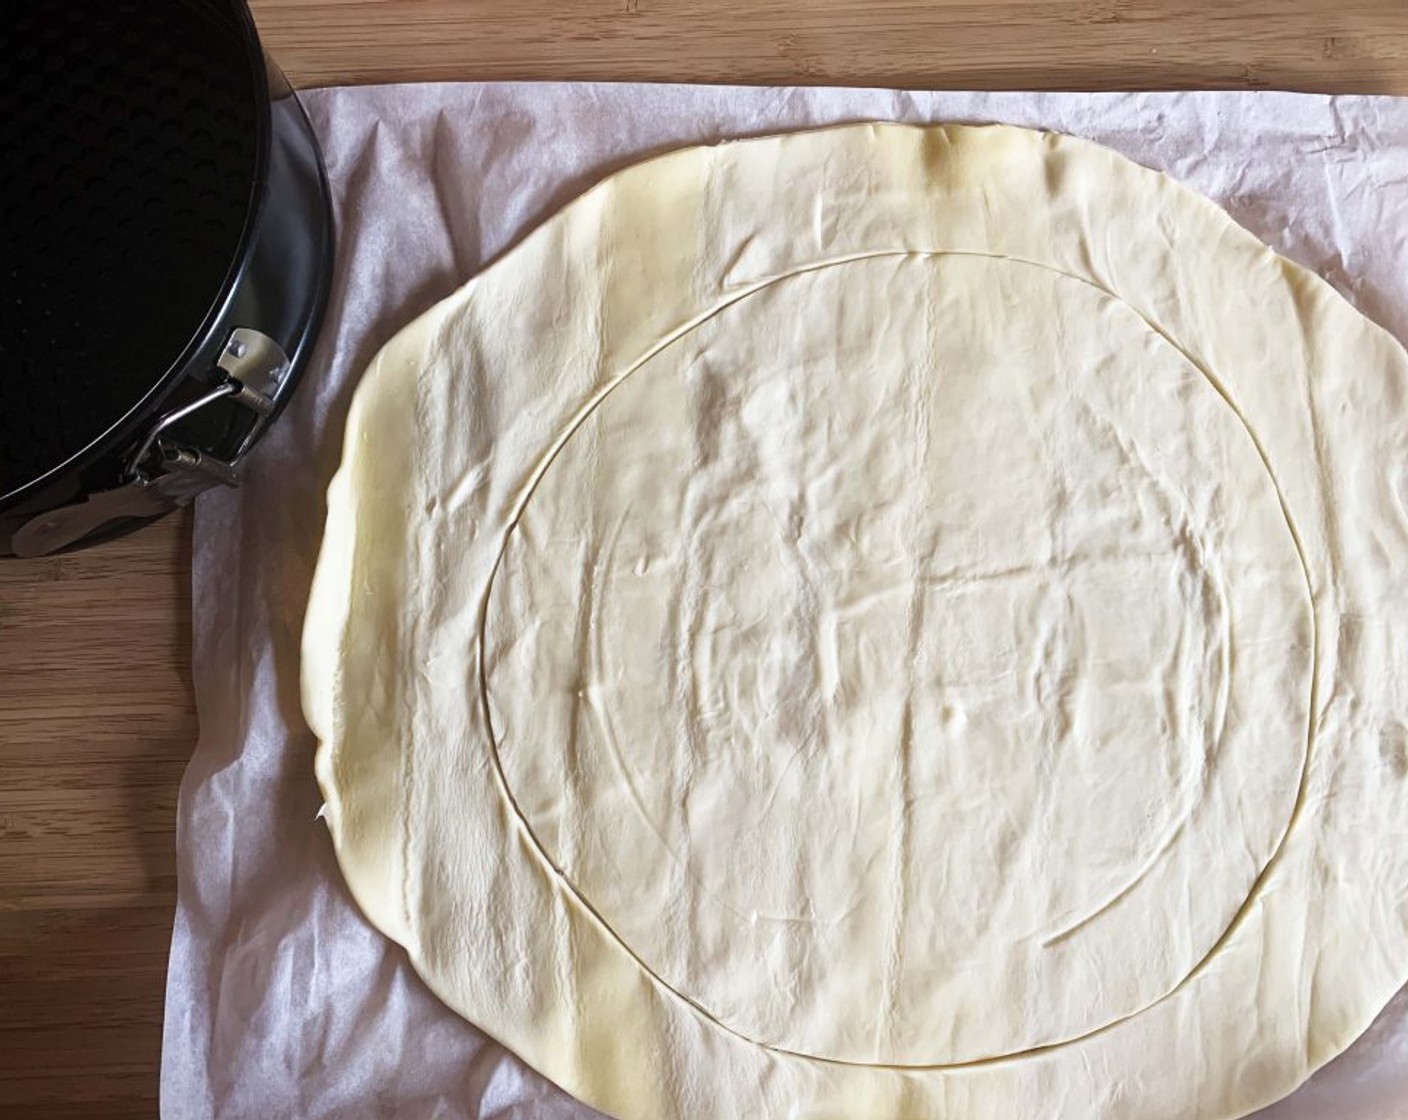 step 2 First off, cut the Puff Pastry (1) measuring it up with a 22-cm springform pan. You will need about a 1.5-cm edge. Cut it right in the center and keep the leftovers, we will use them for the filling. Cut them into 1-cm thick strips and store them in your fridge.